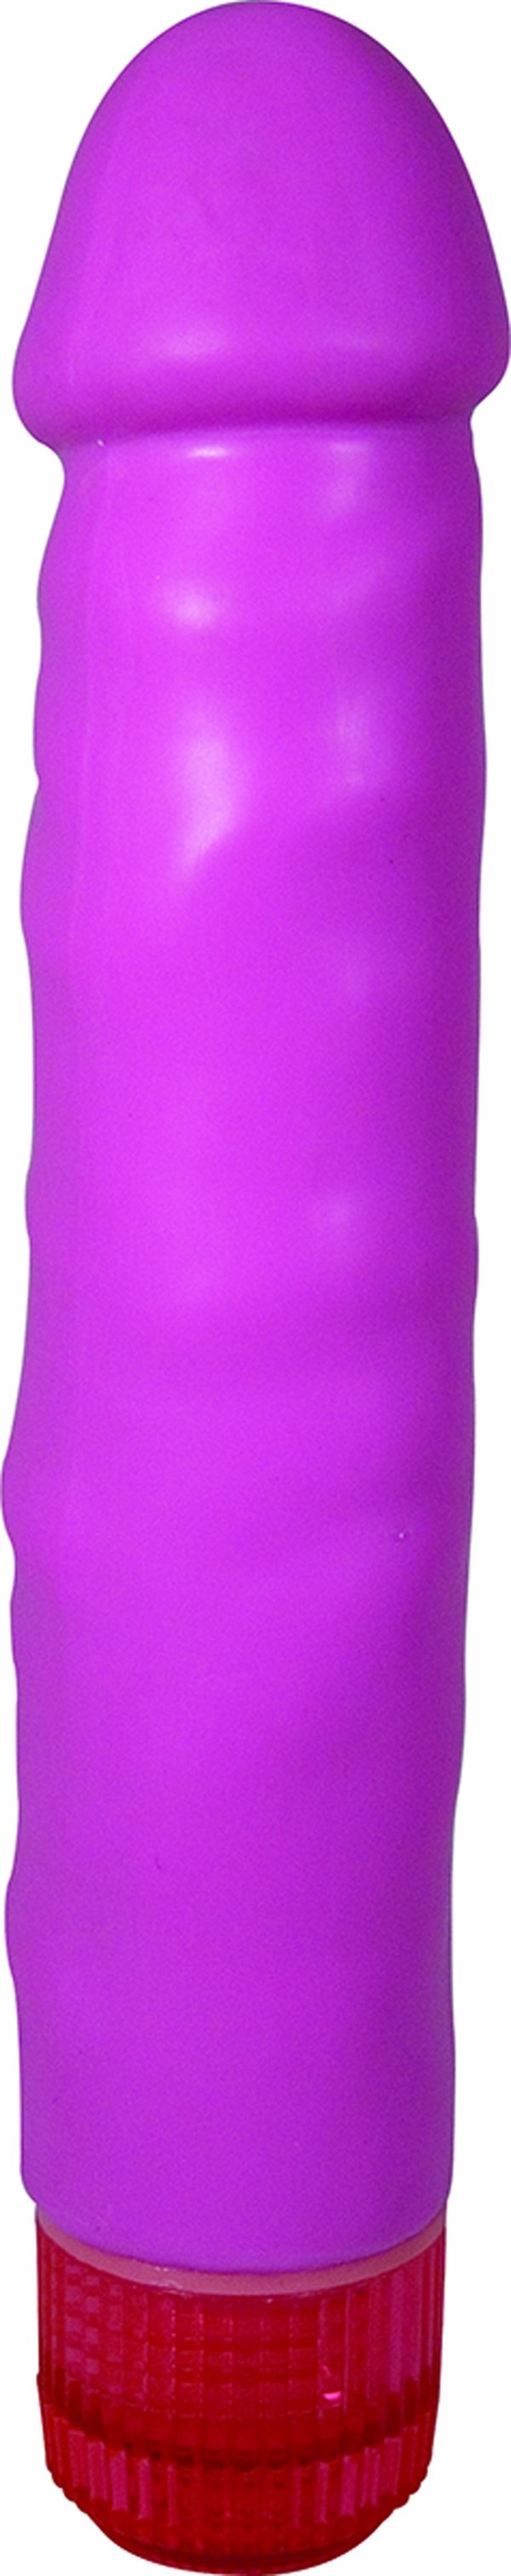 PURE PINK SILICONE #69 (d)